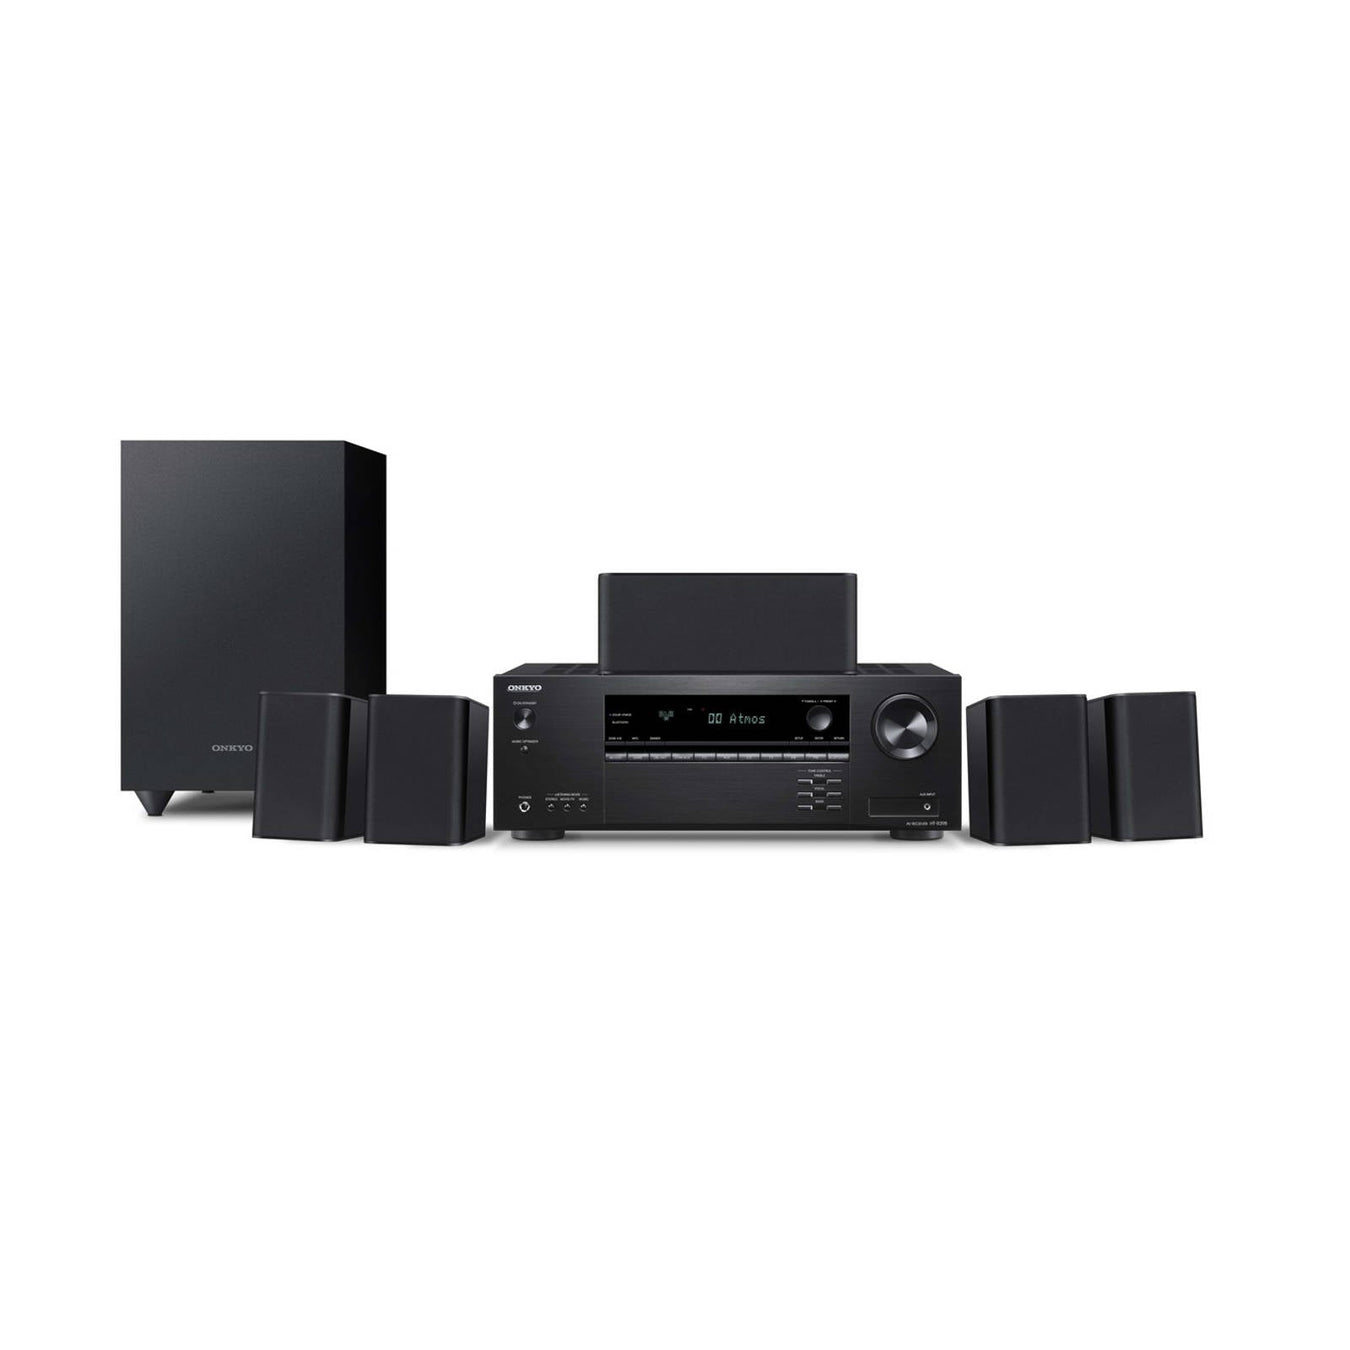 5.1 Home Theater